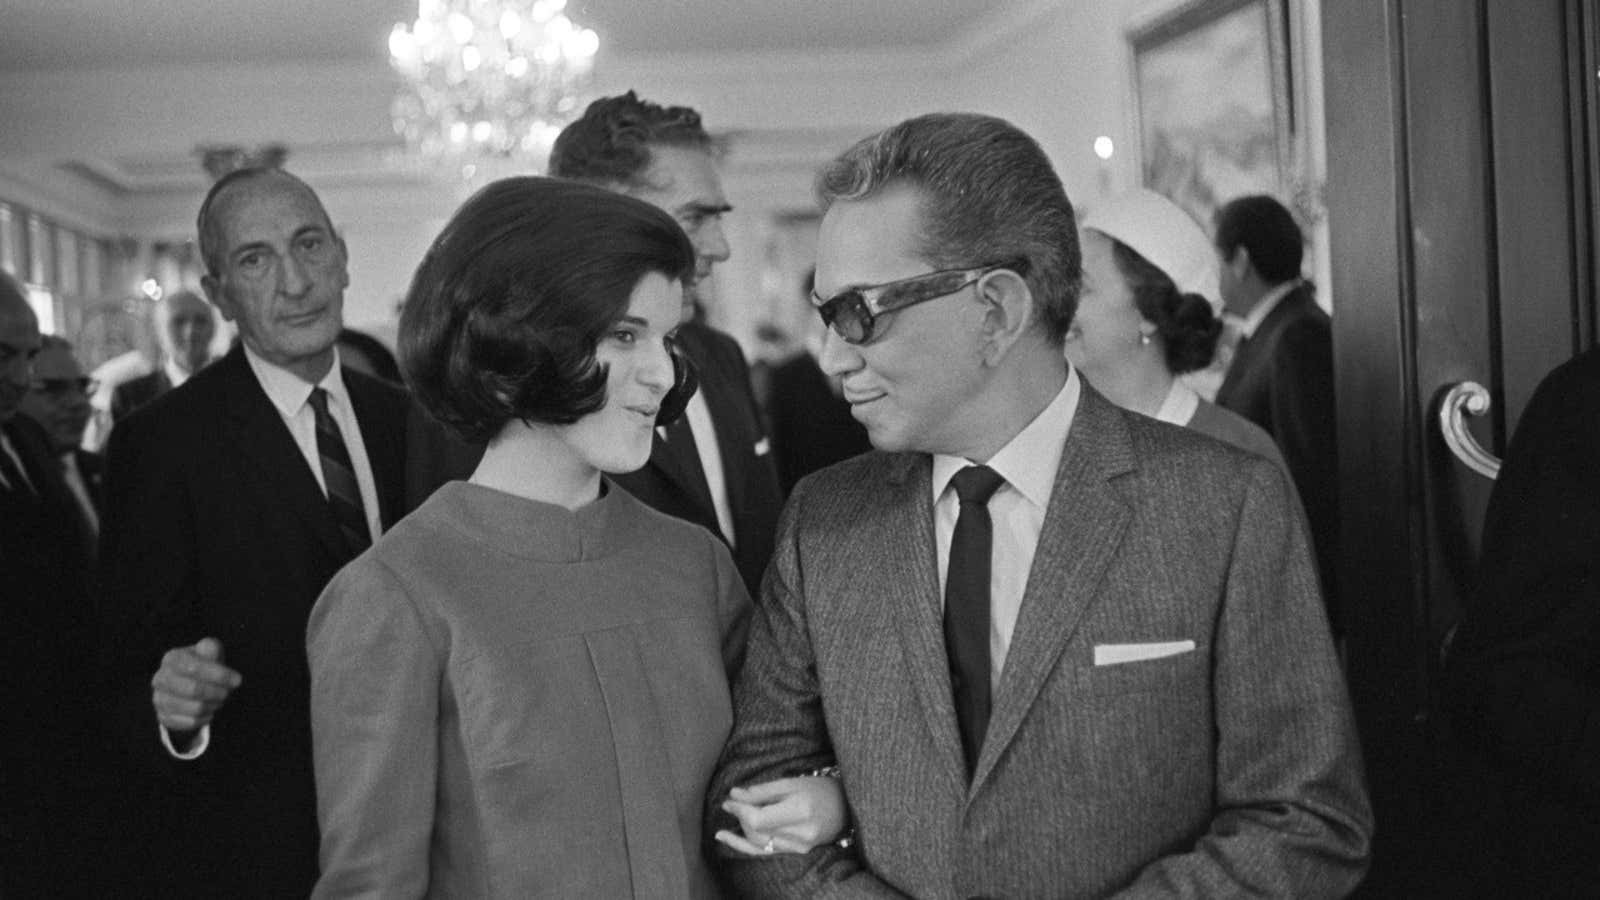 Cantinflas escorts Lyndon Johnson’s daughter Luci Baines Johnson at the White House, April 15, 1966.